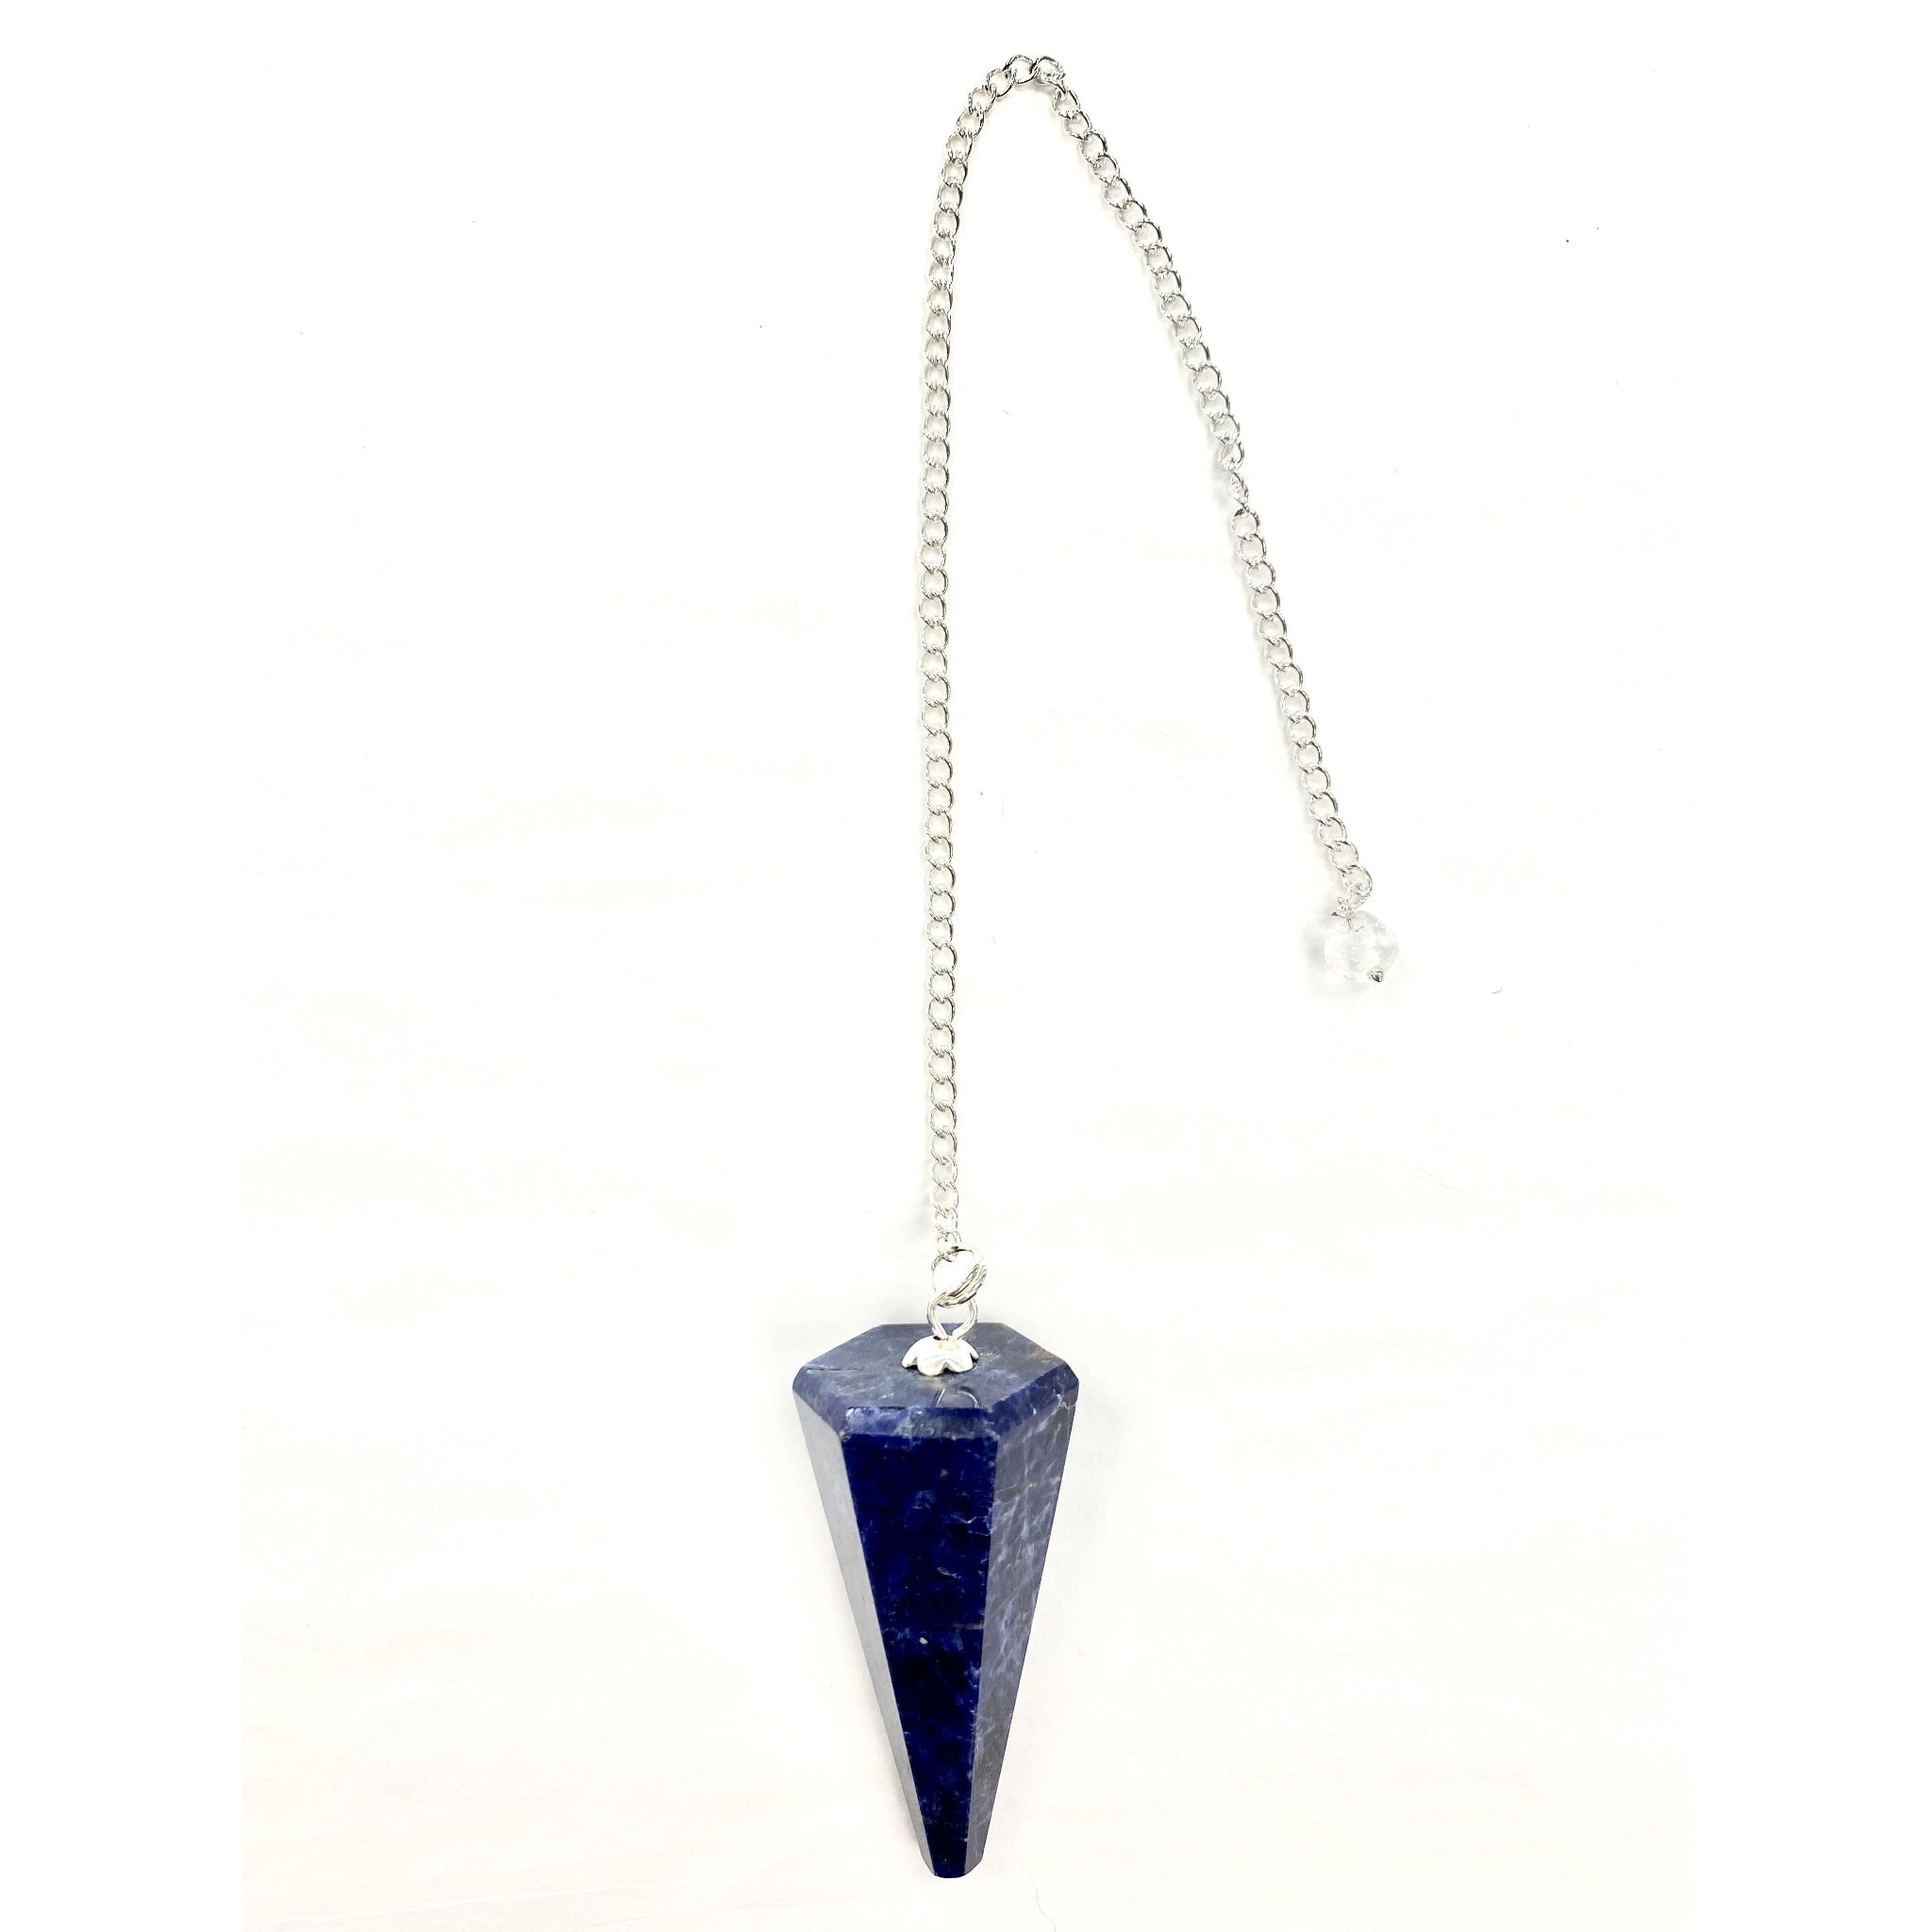 Blue cone shaped pedulum with silver colored chain 